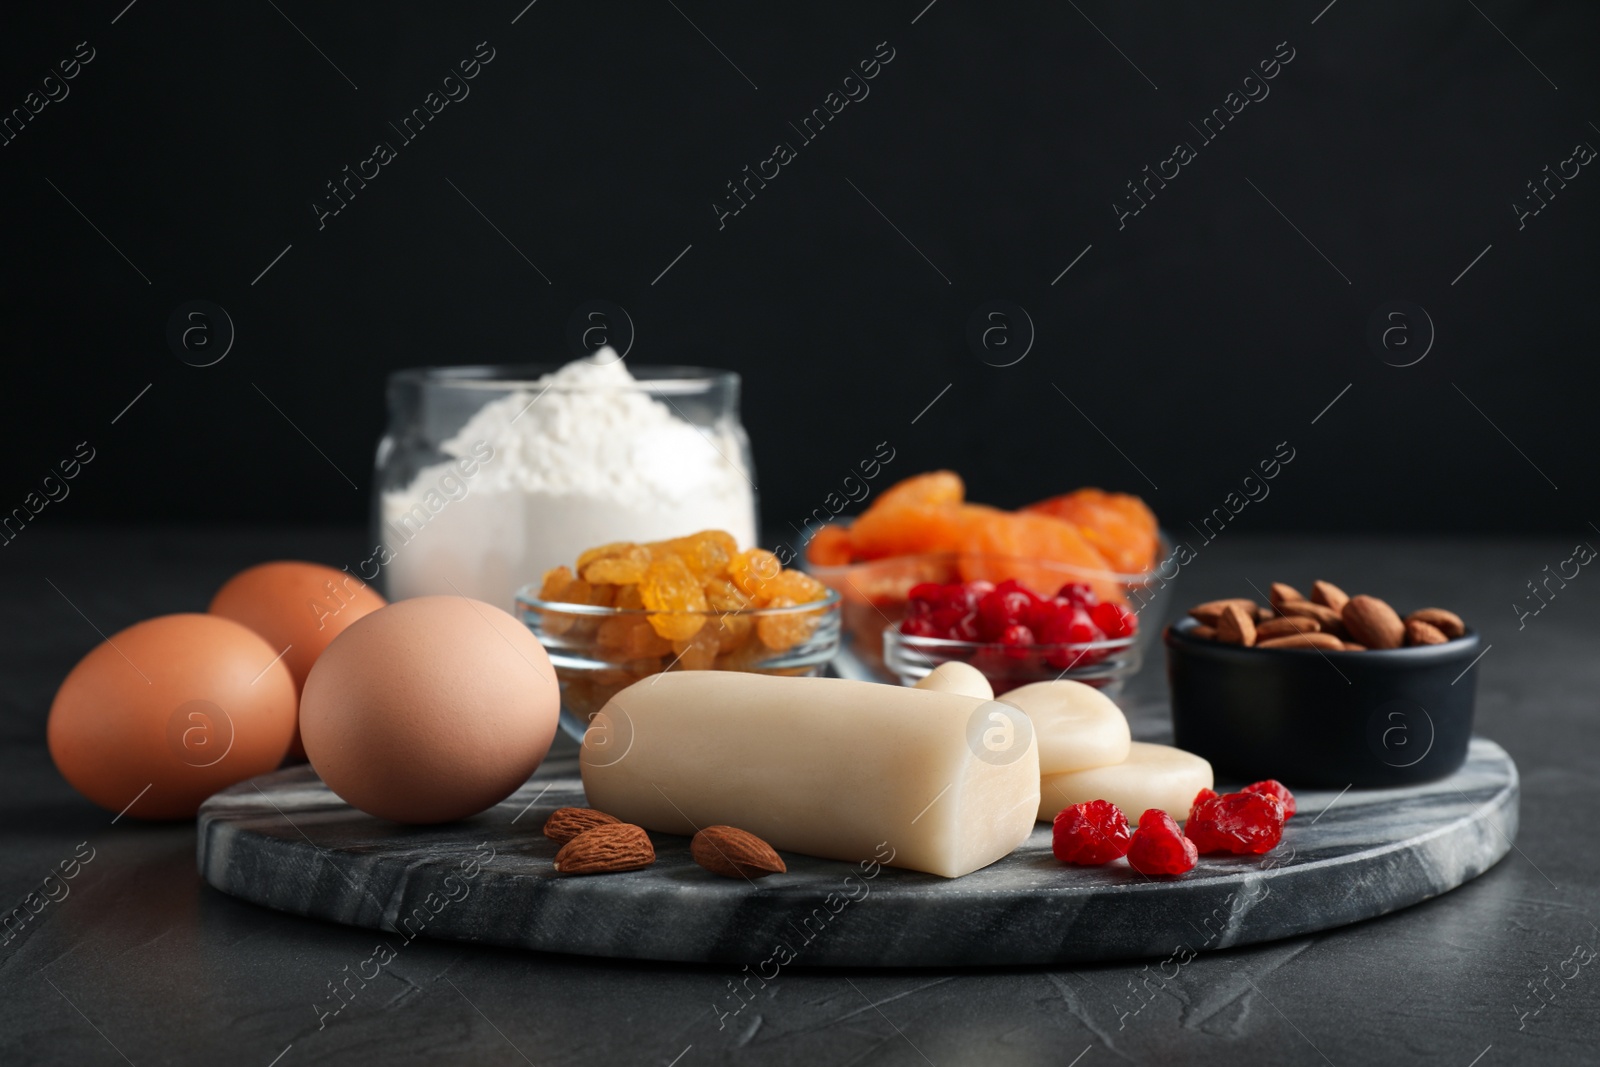 Photo of Marzipan and other ingredients for homemade Stollen on grey table against dark background. Baking traditional German Christmas bread